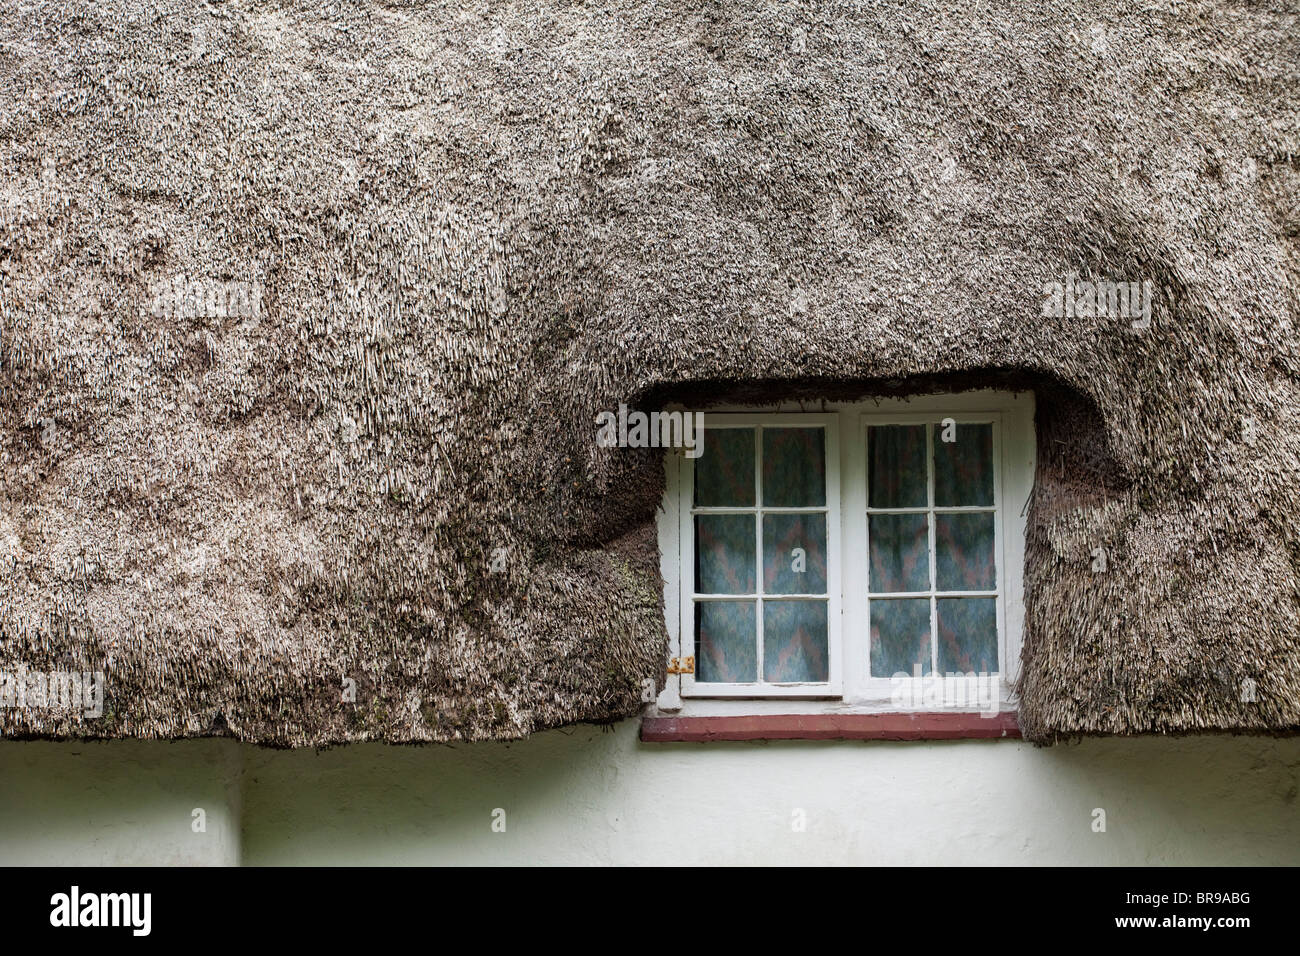 A traditional thatched roof and cottage window, Dorset, UK Stock Photo